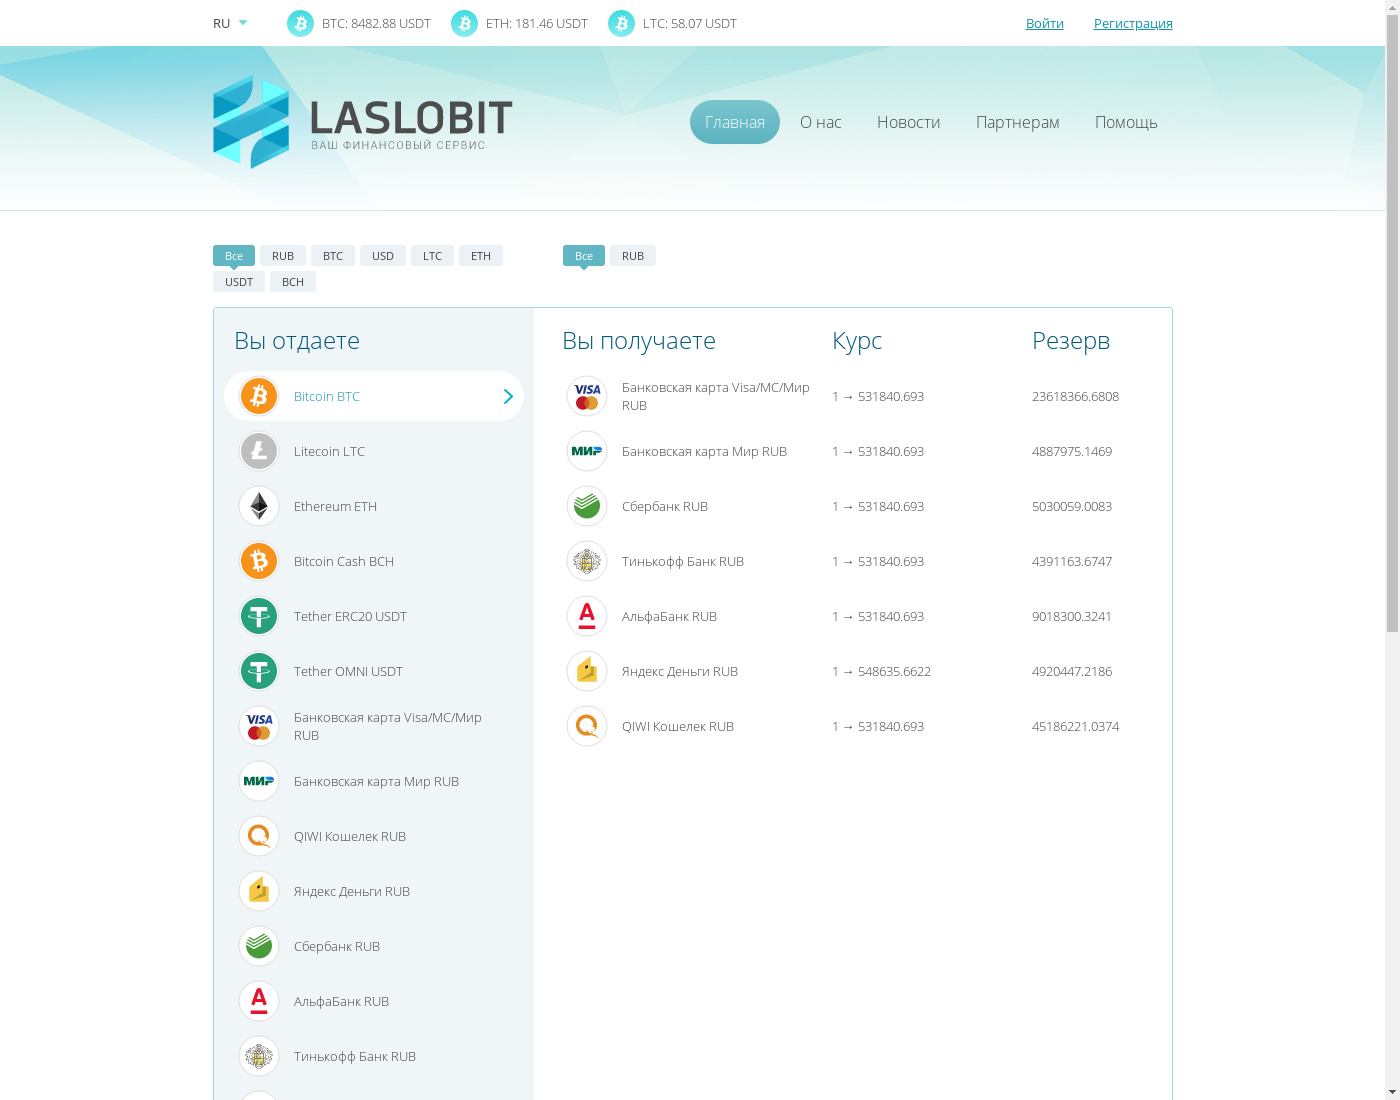 laslobit user interface: the home page in English